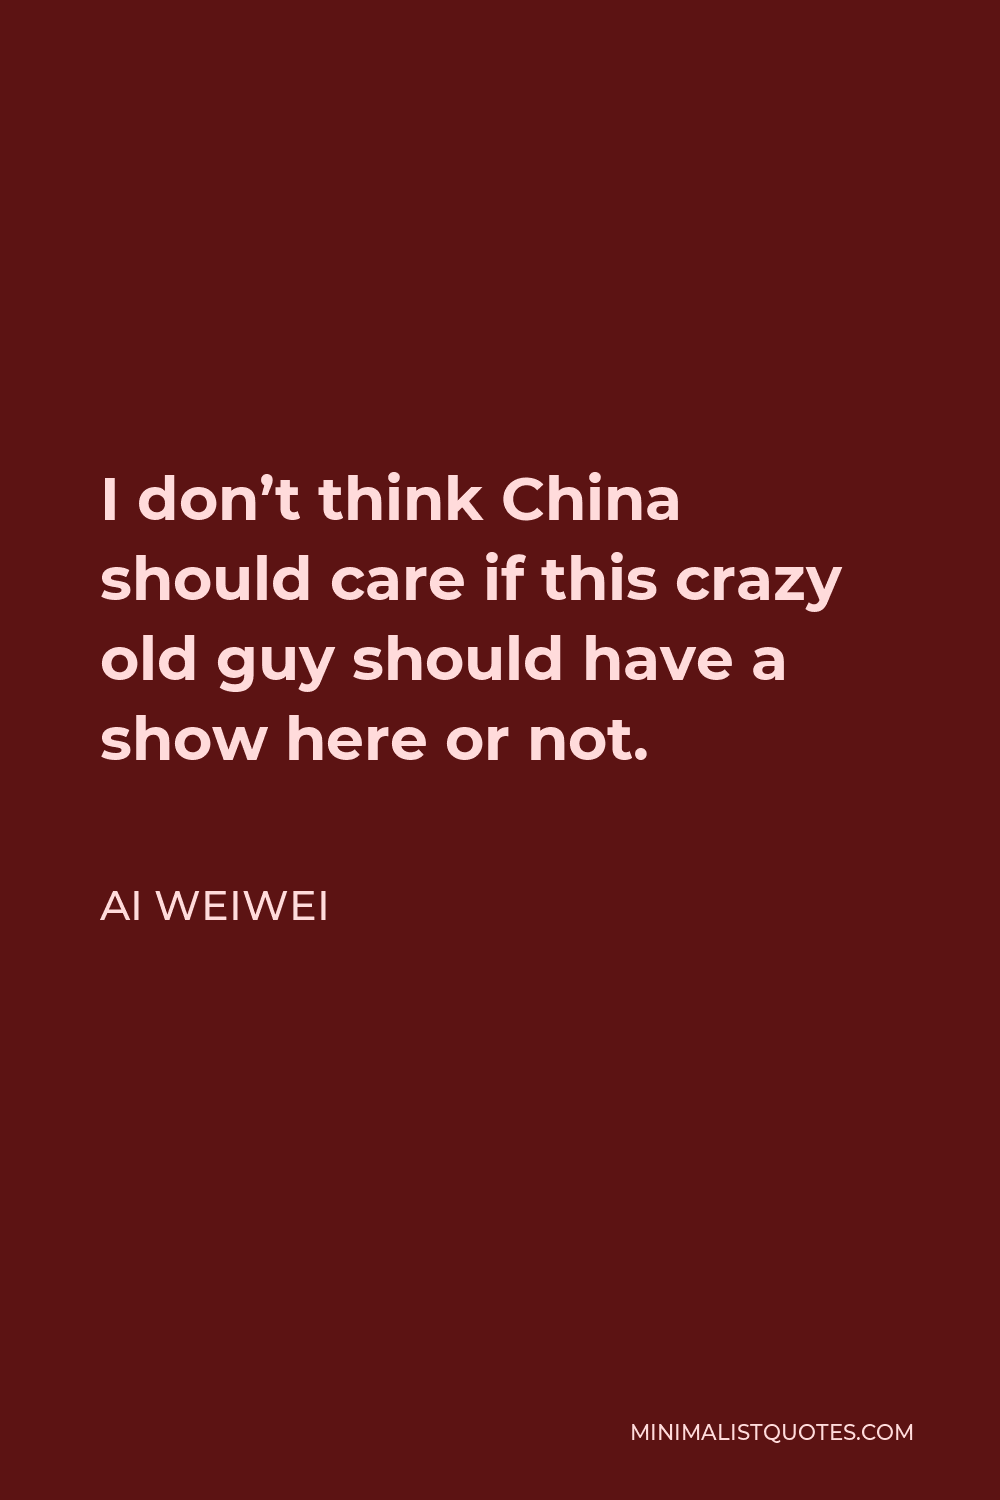 Ai Weiwei Quote - I don’t think China should care if this crazy old guy should have a show here or not.